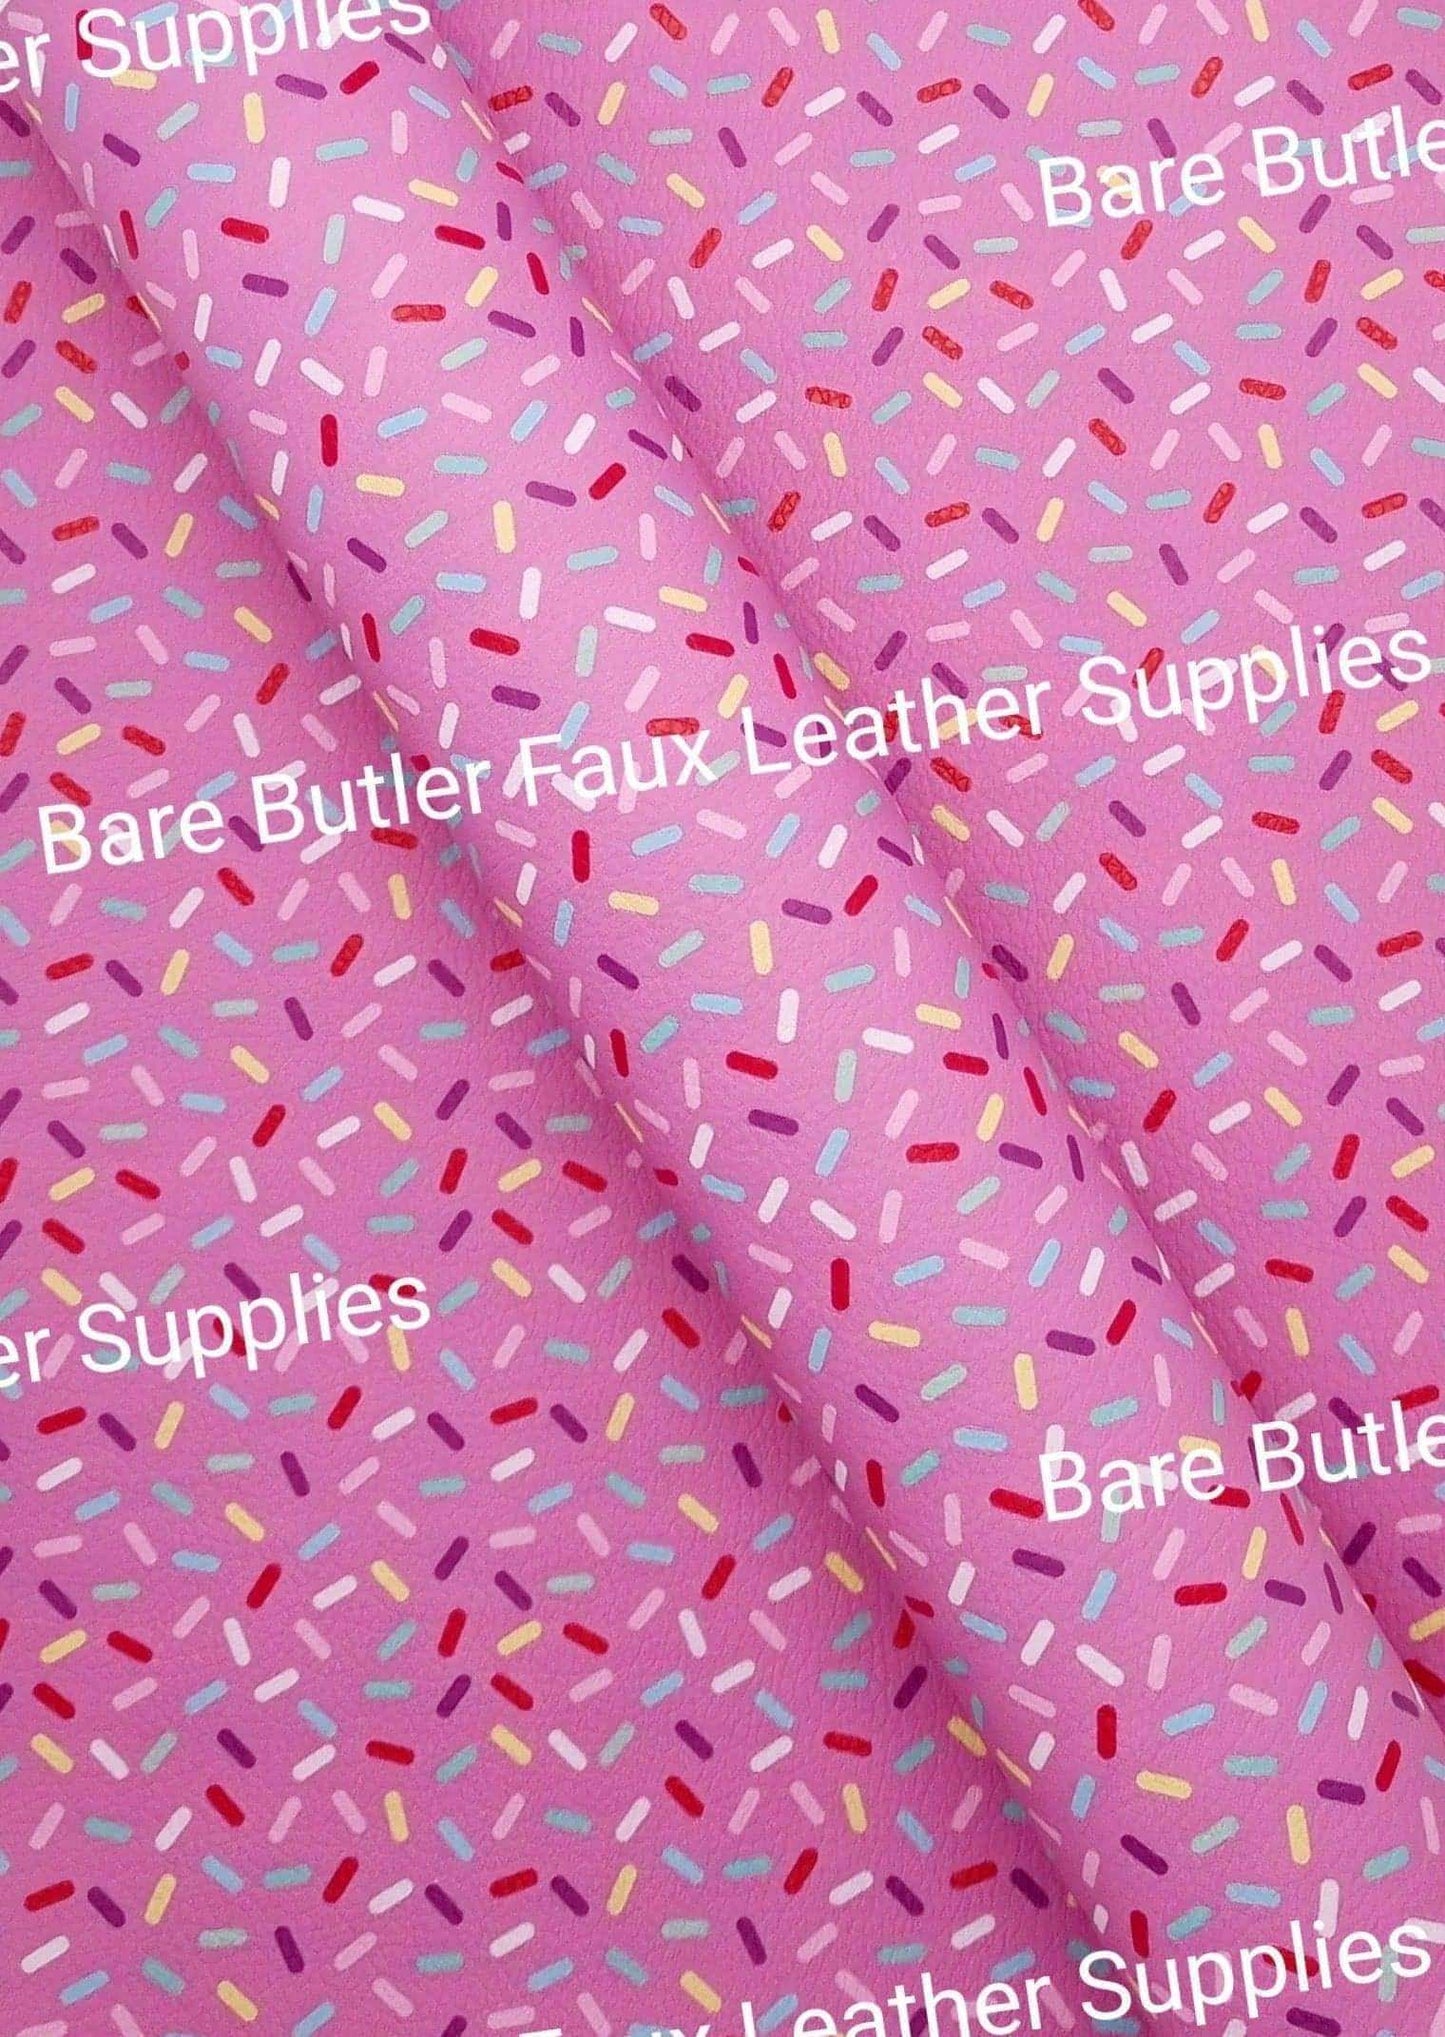 Sprinkles Pink Litchi - Faux, Faux Leather, ice cream, Leather, leatherette, Litchi, sprinkles - Bare Butler Faux Leather Supplies 